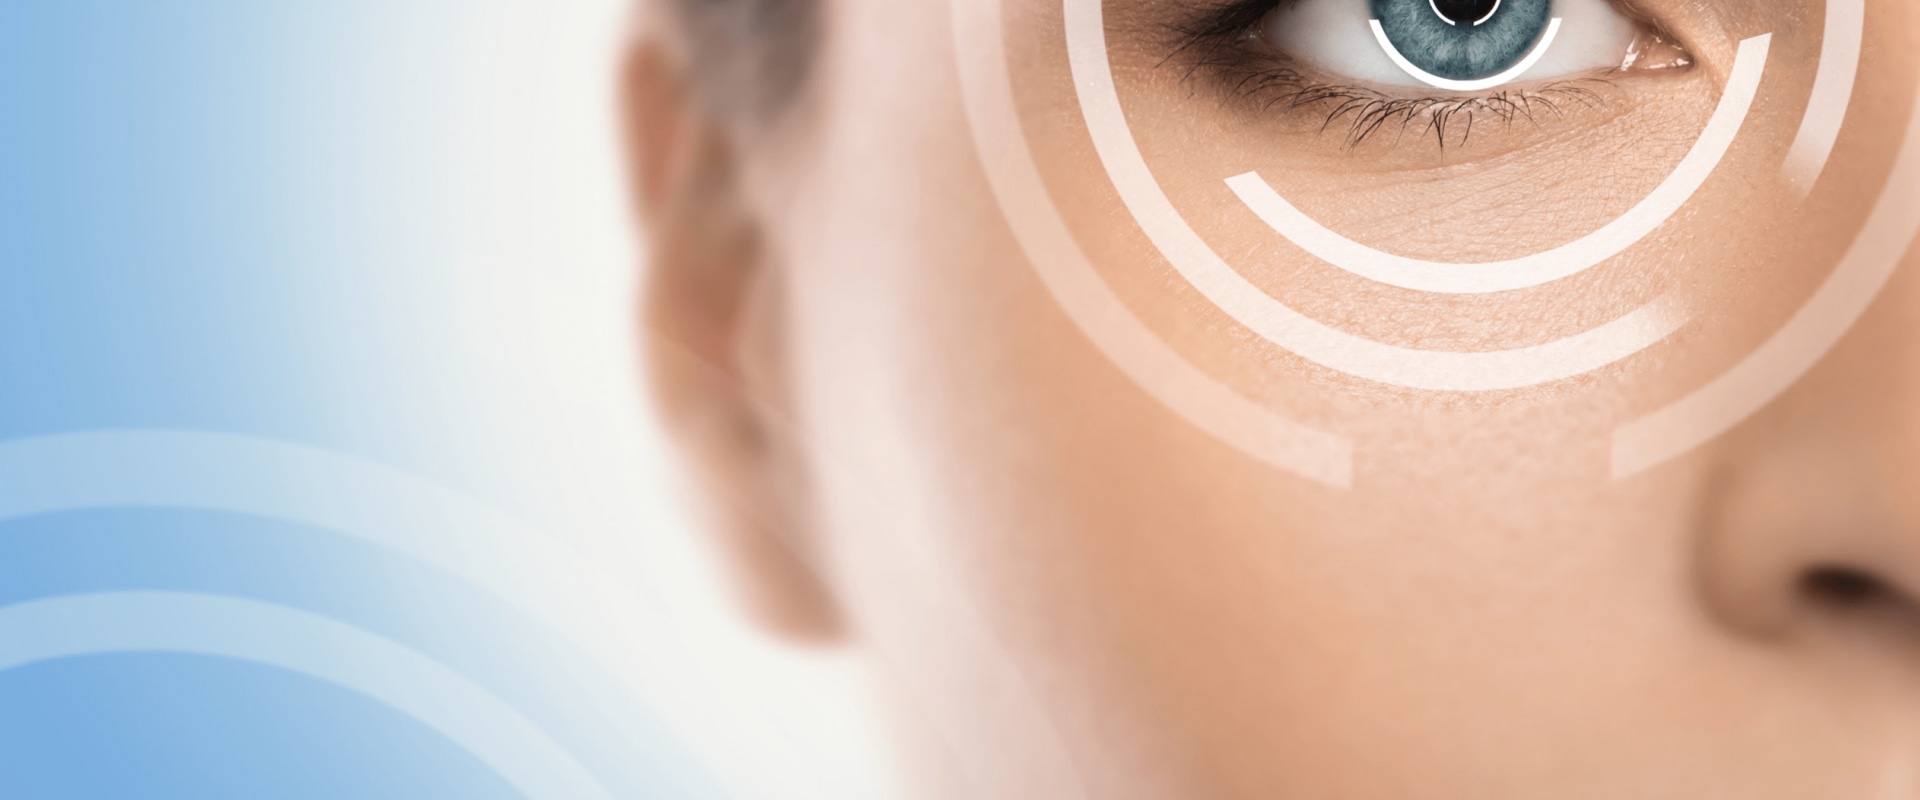 What Medications Can Affect LASIK Surgery?